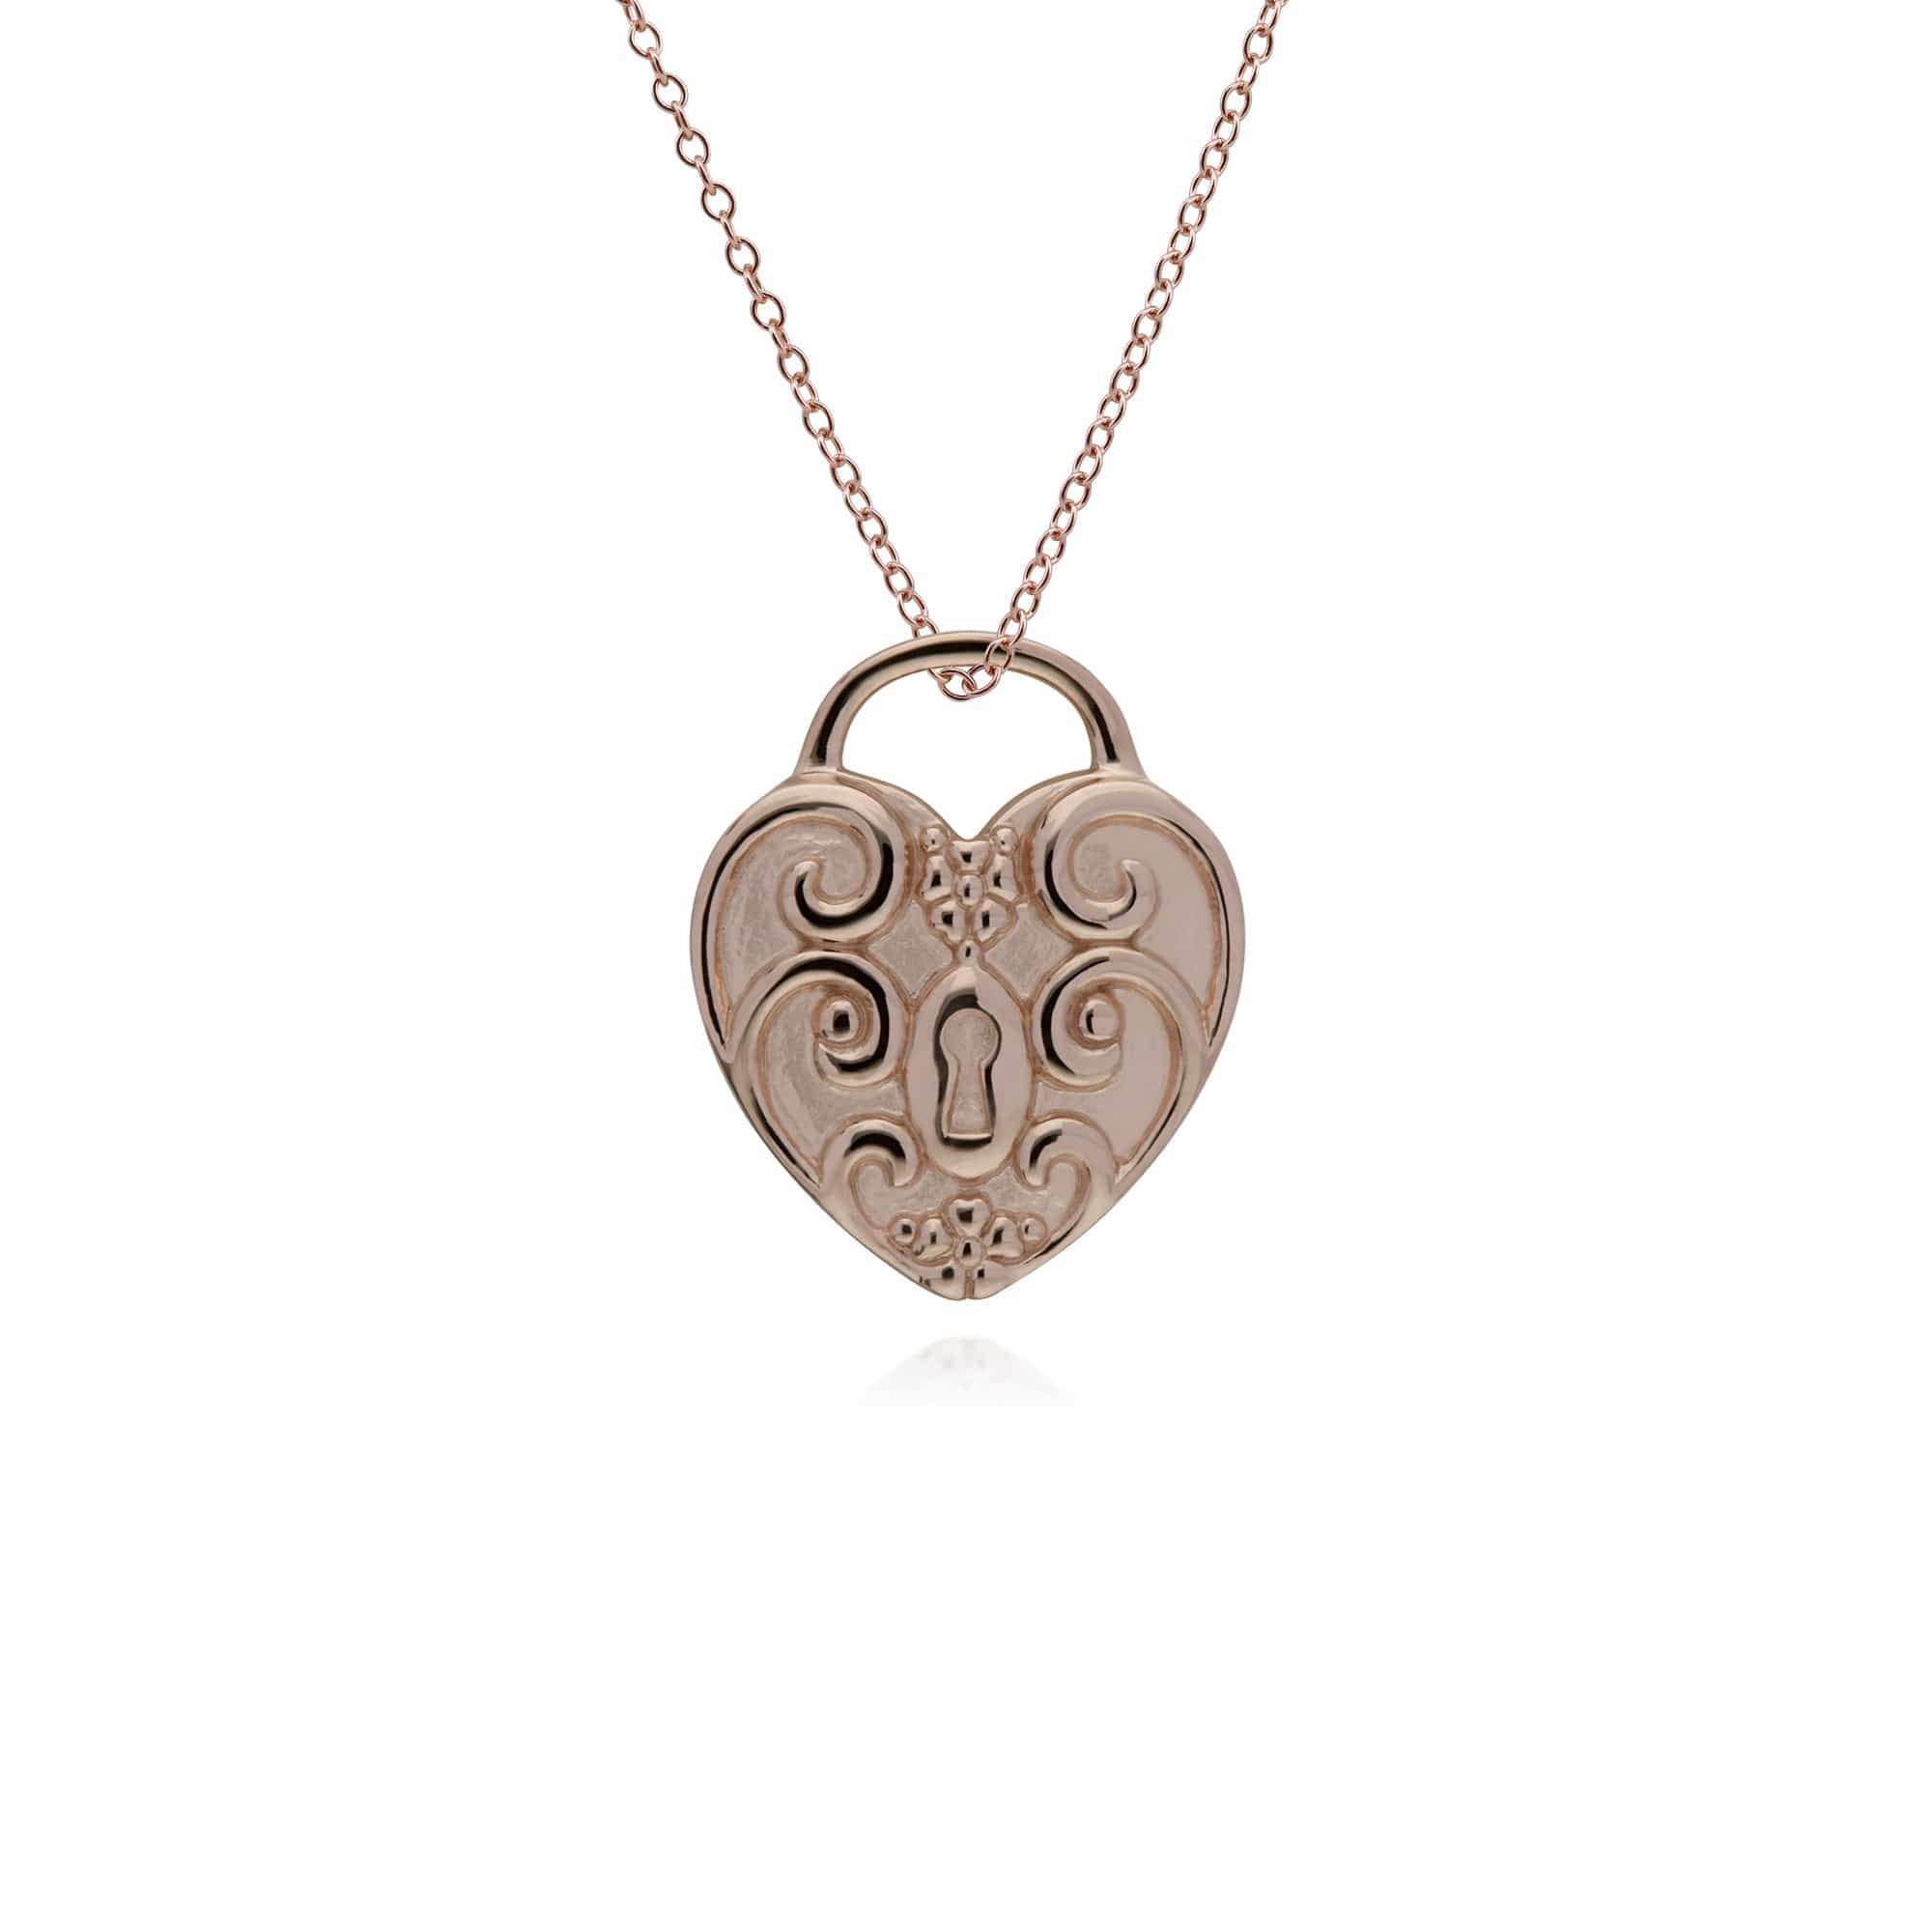 270P025903925-270P026501925 Classic Swirl Heart Lock Pendant & Opal Charm in Rose Gold Plated 925 Sterling Silver 3